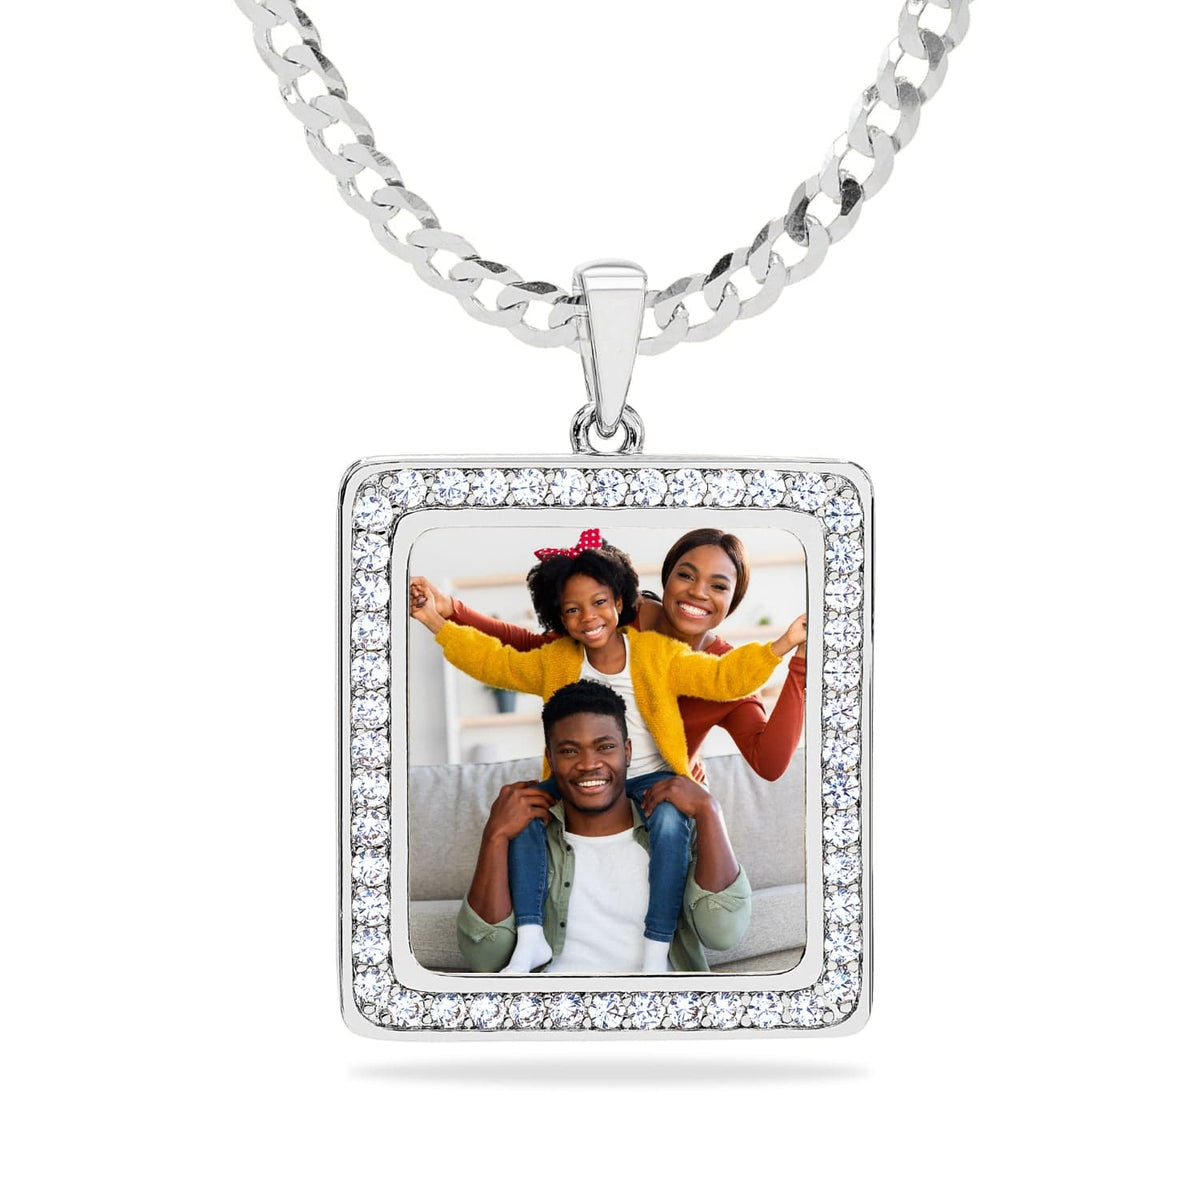 Sterling Silver / Cuban Chain Iced Out Square Photo Pendant